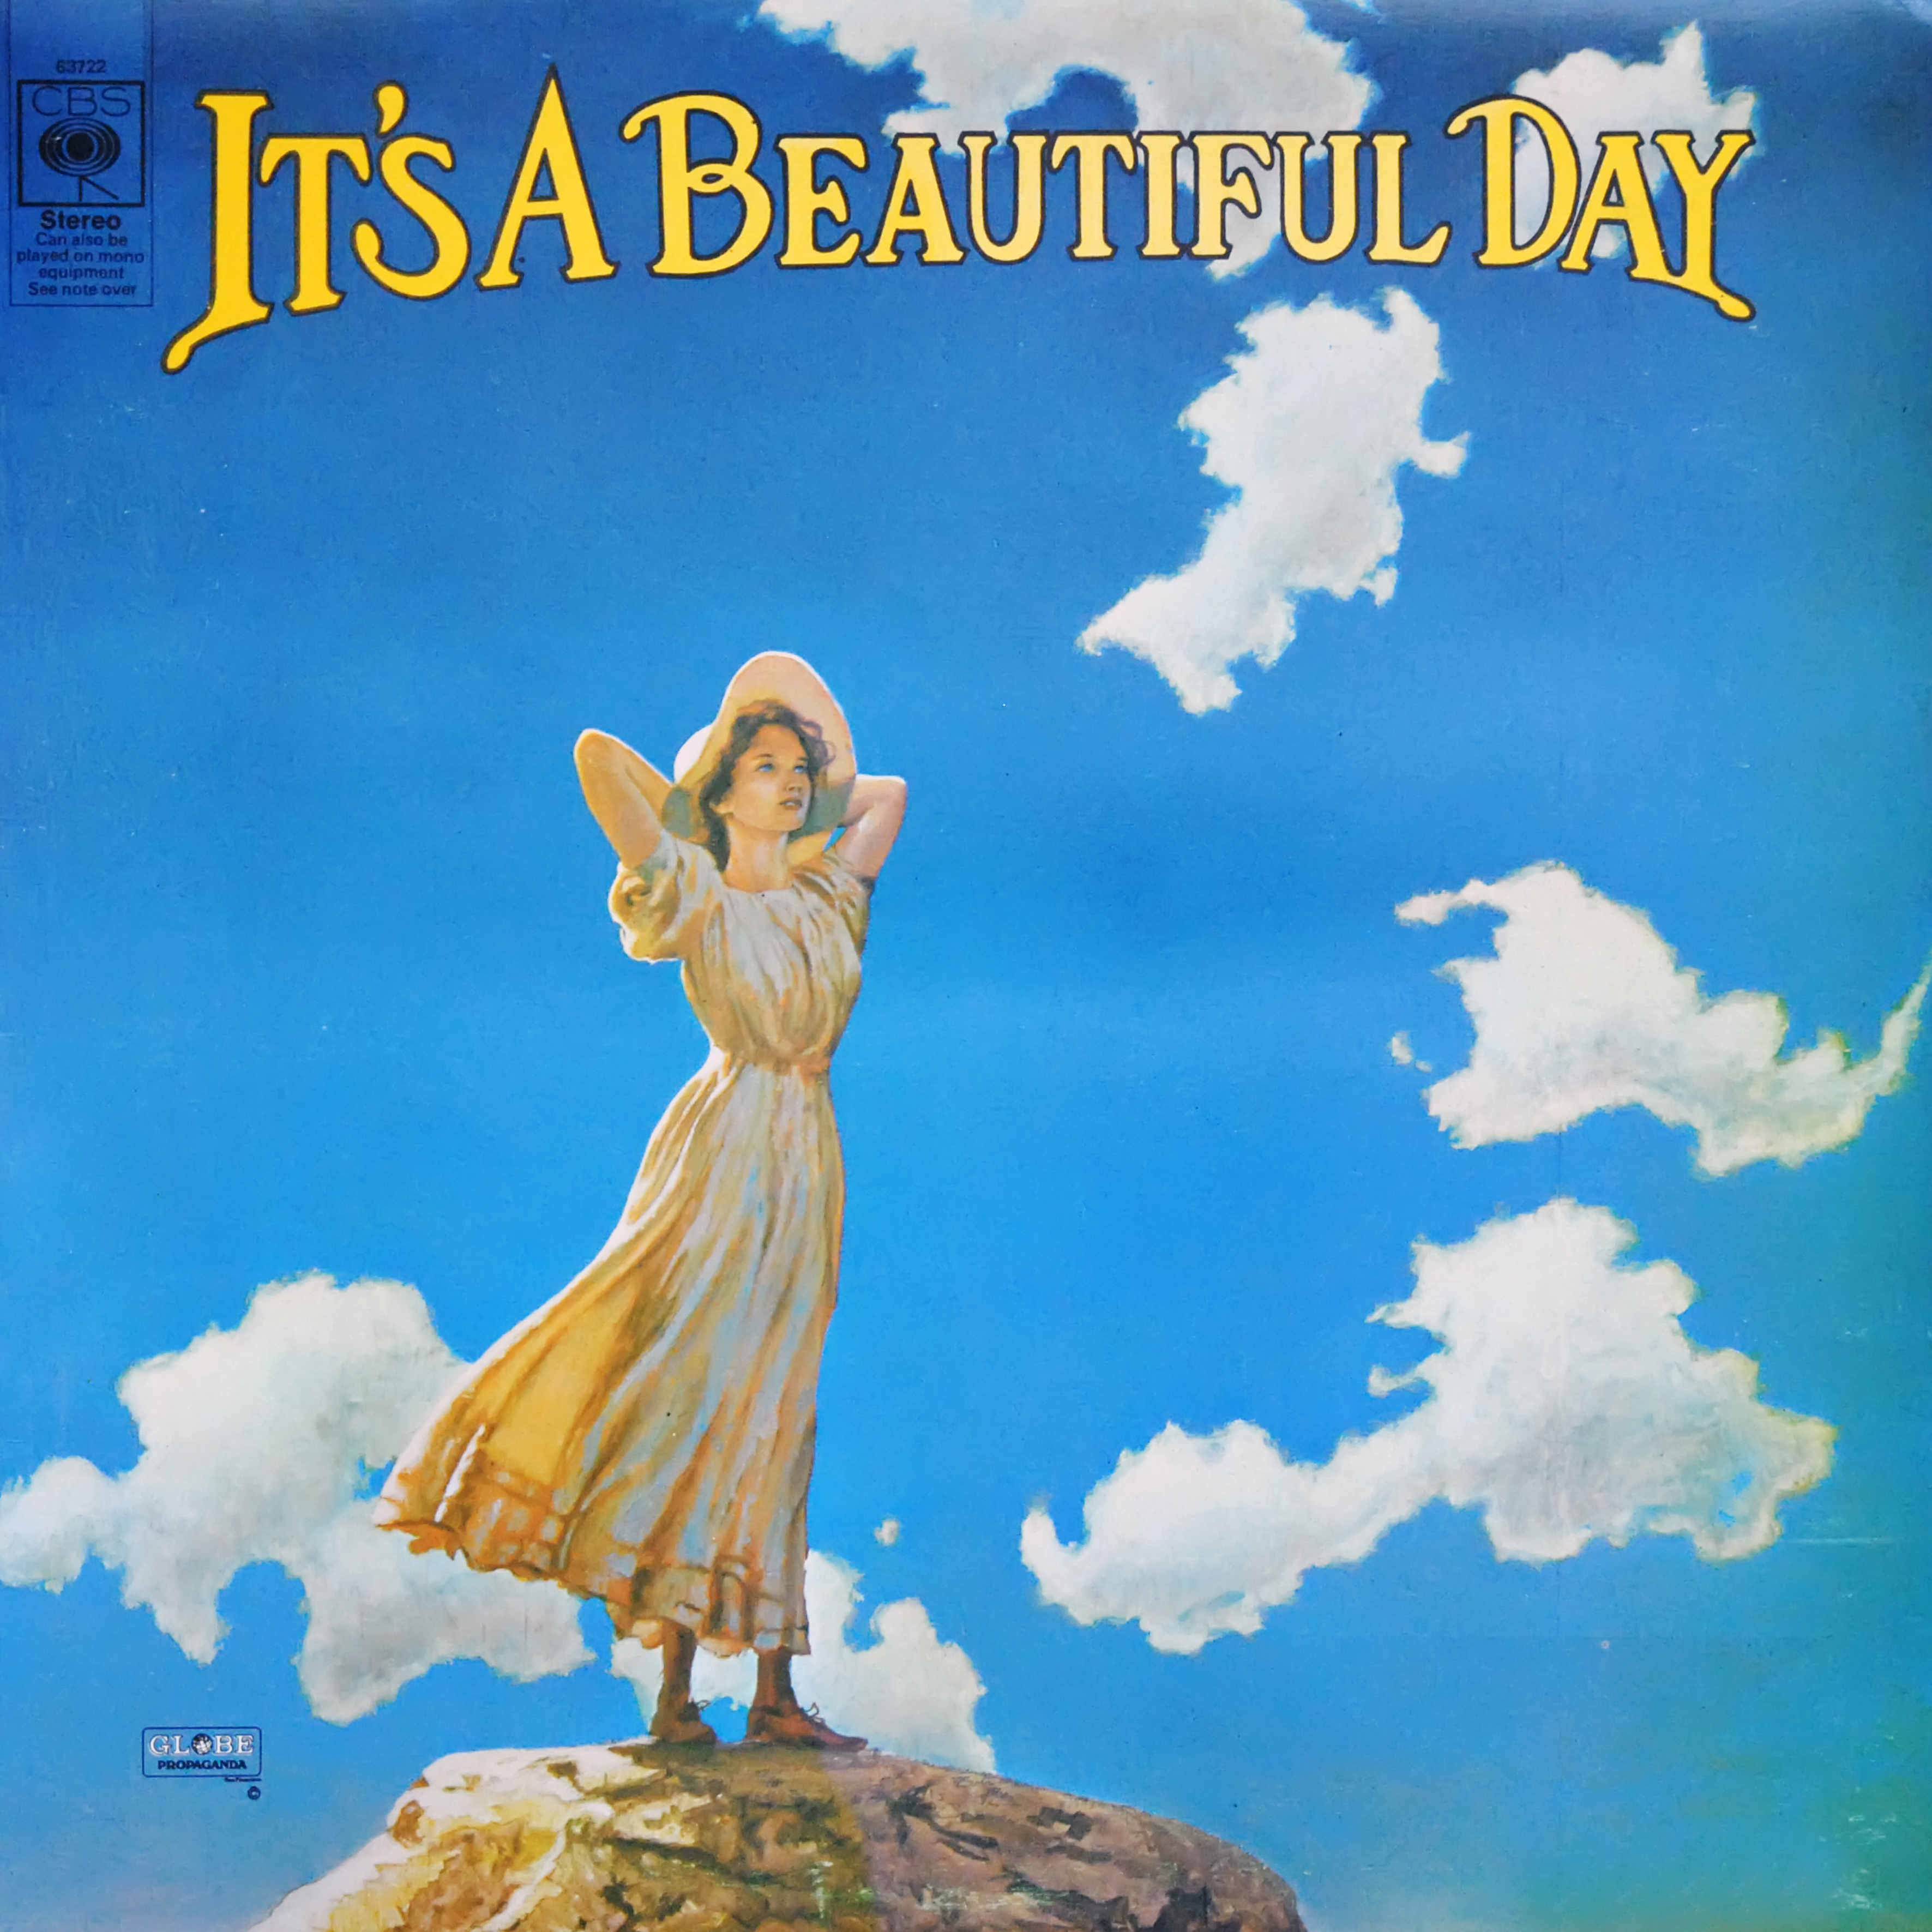 This is beautiful day. Its a beautiful Day 1969. Группа it’s a beautiful Day. It’s a beautiful Day it’s a beautiful Day. It's a beautiful Day - it's a beautiful Day (1969).